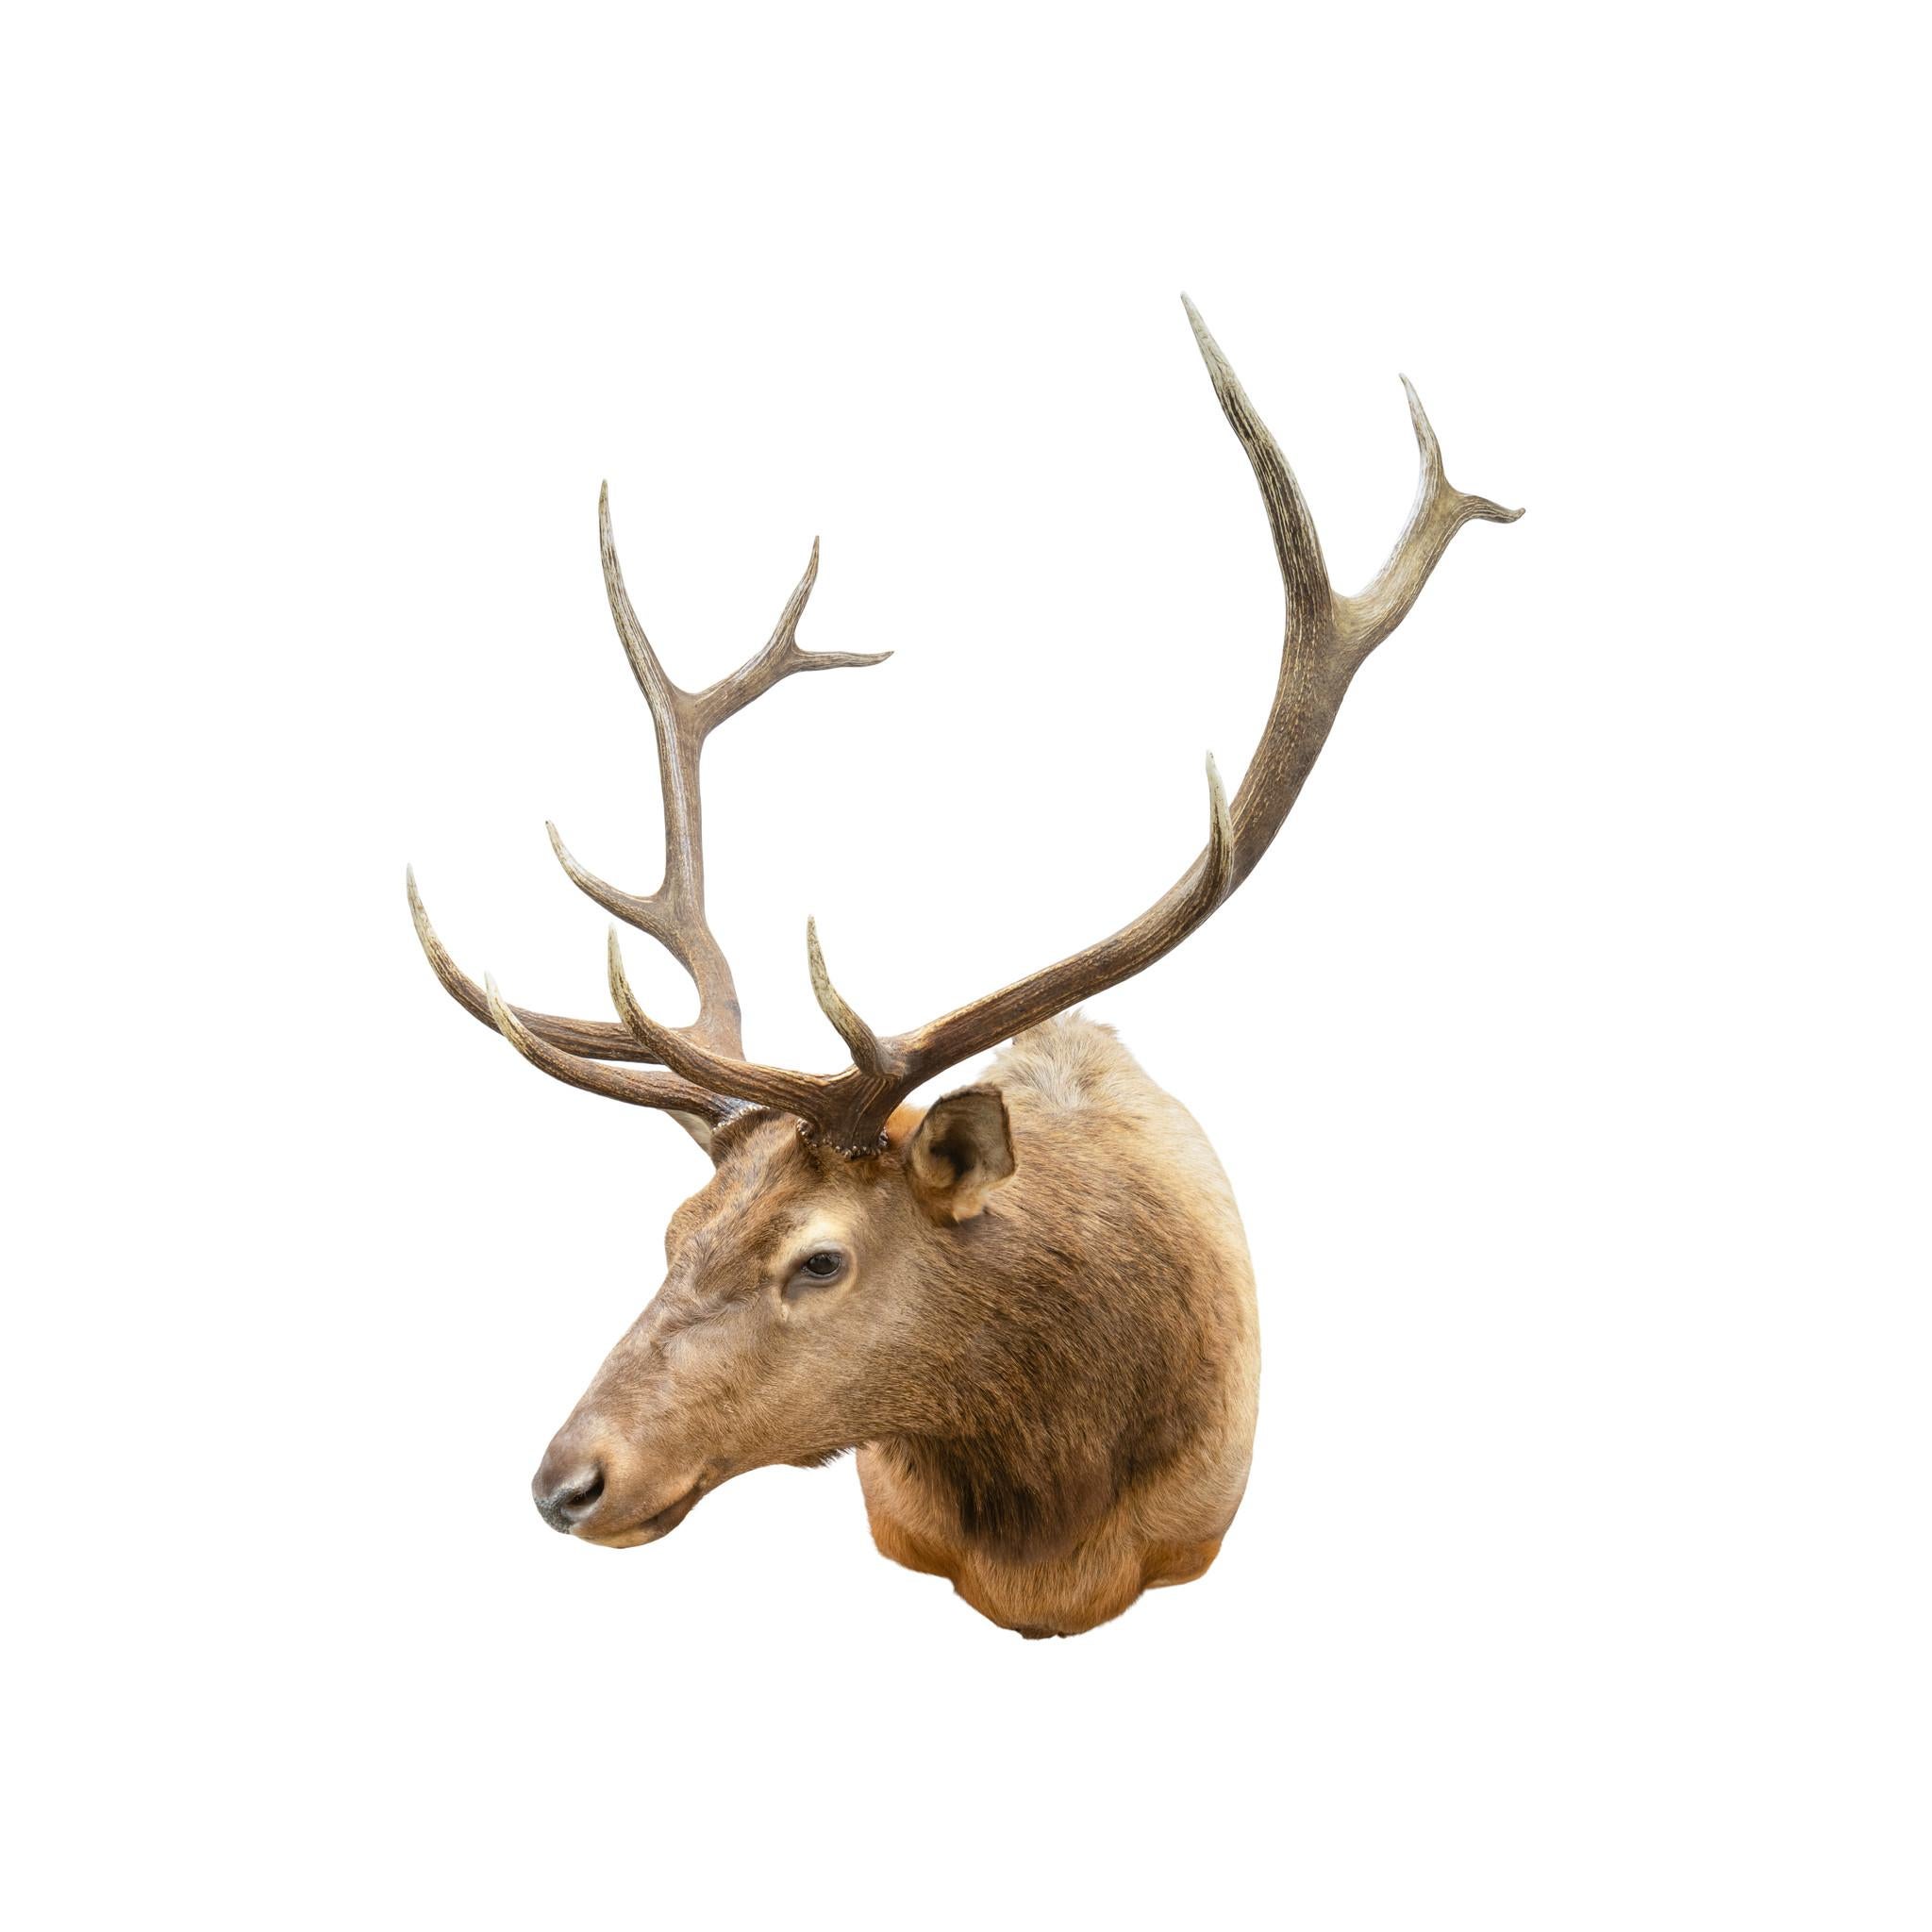 Idaho 6 x 6 Elk Mount In Good Condition For Sale In Coeur d'Alene, ID